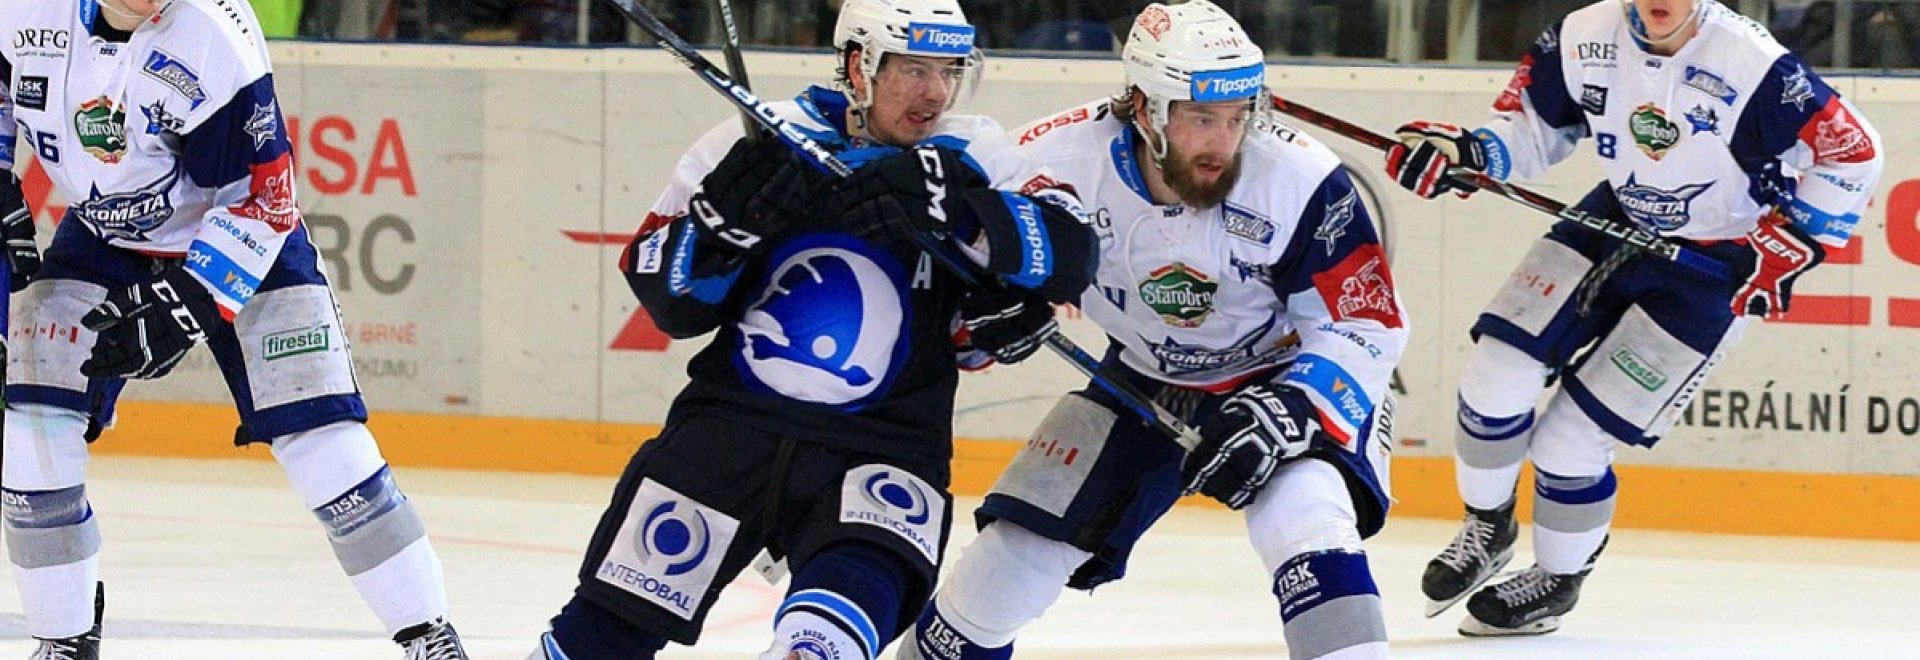 Czech playoffs to stream throughout Europe on Fanseat Euro Hockey Clubs